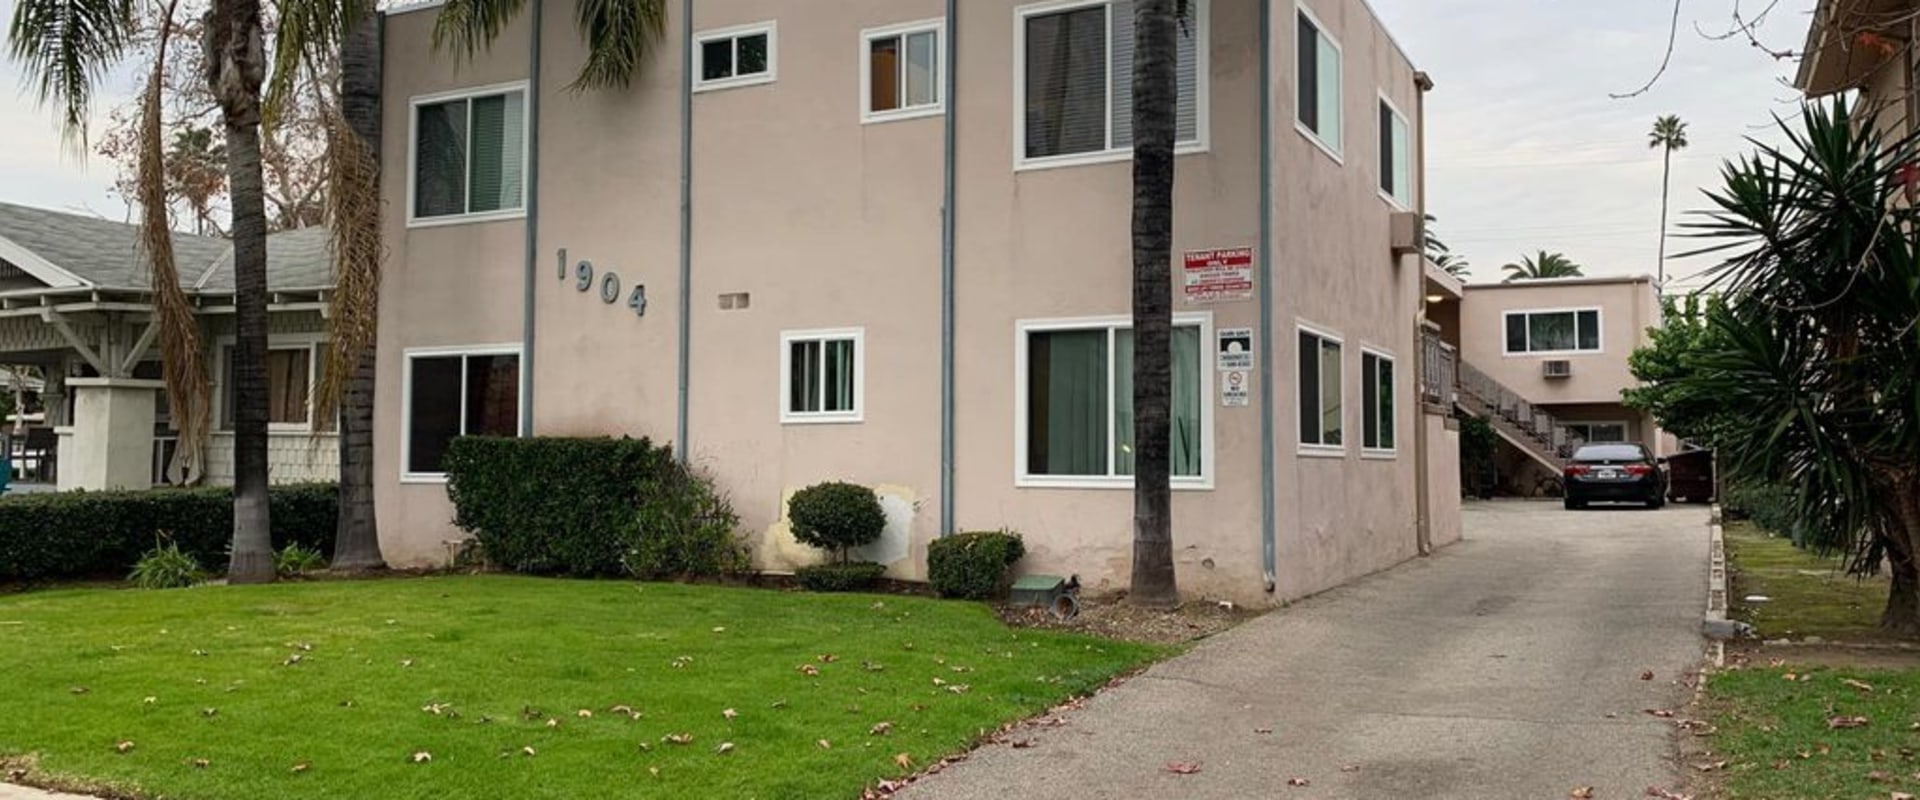 Finding Emergency Housing in Glendale, CA: A Guide to the Section 8 Voucher Program